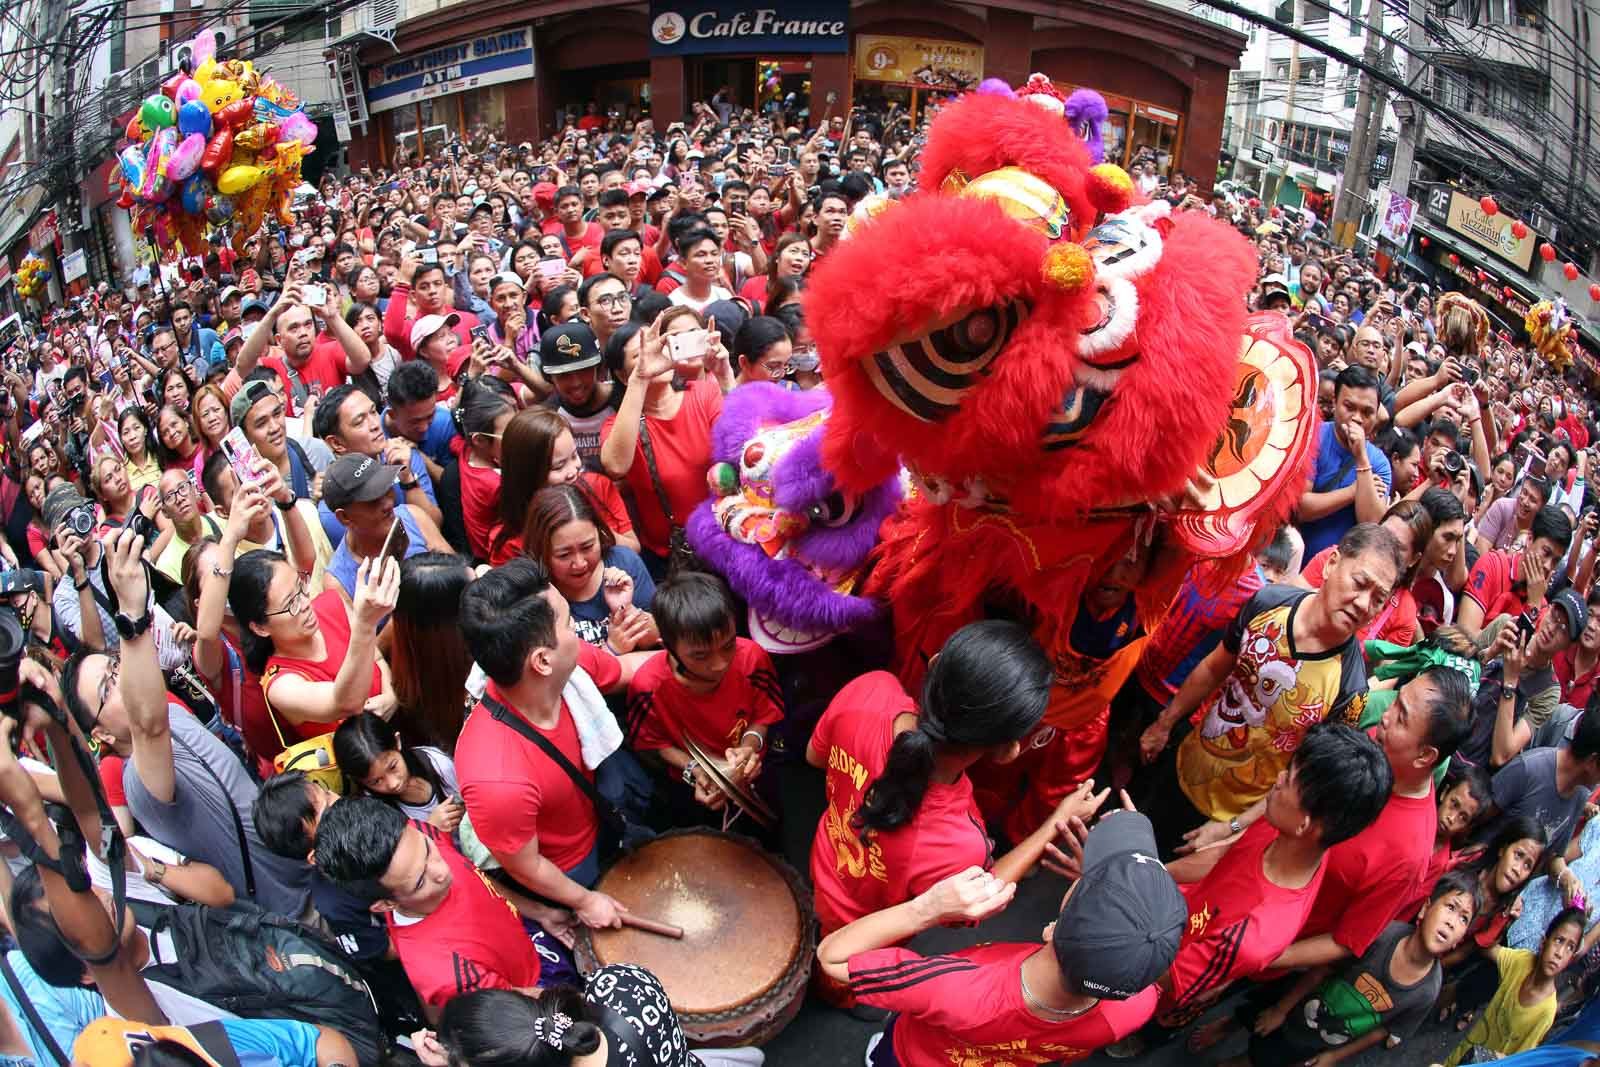 CROWDS. Lion dancers are surrounded by crowds celebrating the Chinese Lunar New Year along the streets of Chinatown in Binondo, Manila, as they welcome the year of the Metal Rat on January 25, 2020. Photo by Ben Nabong/Rappler  